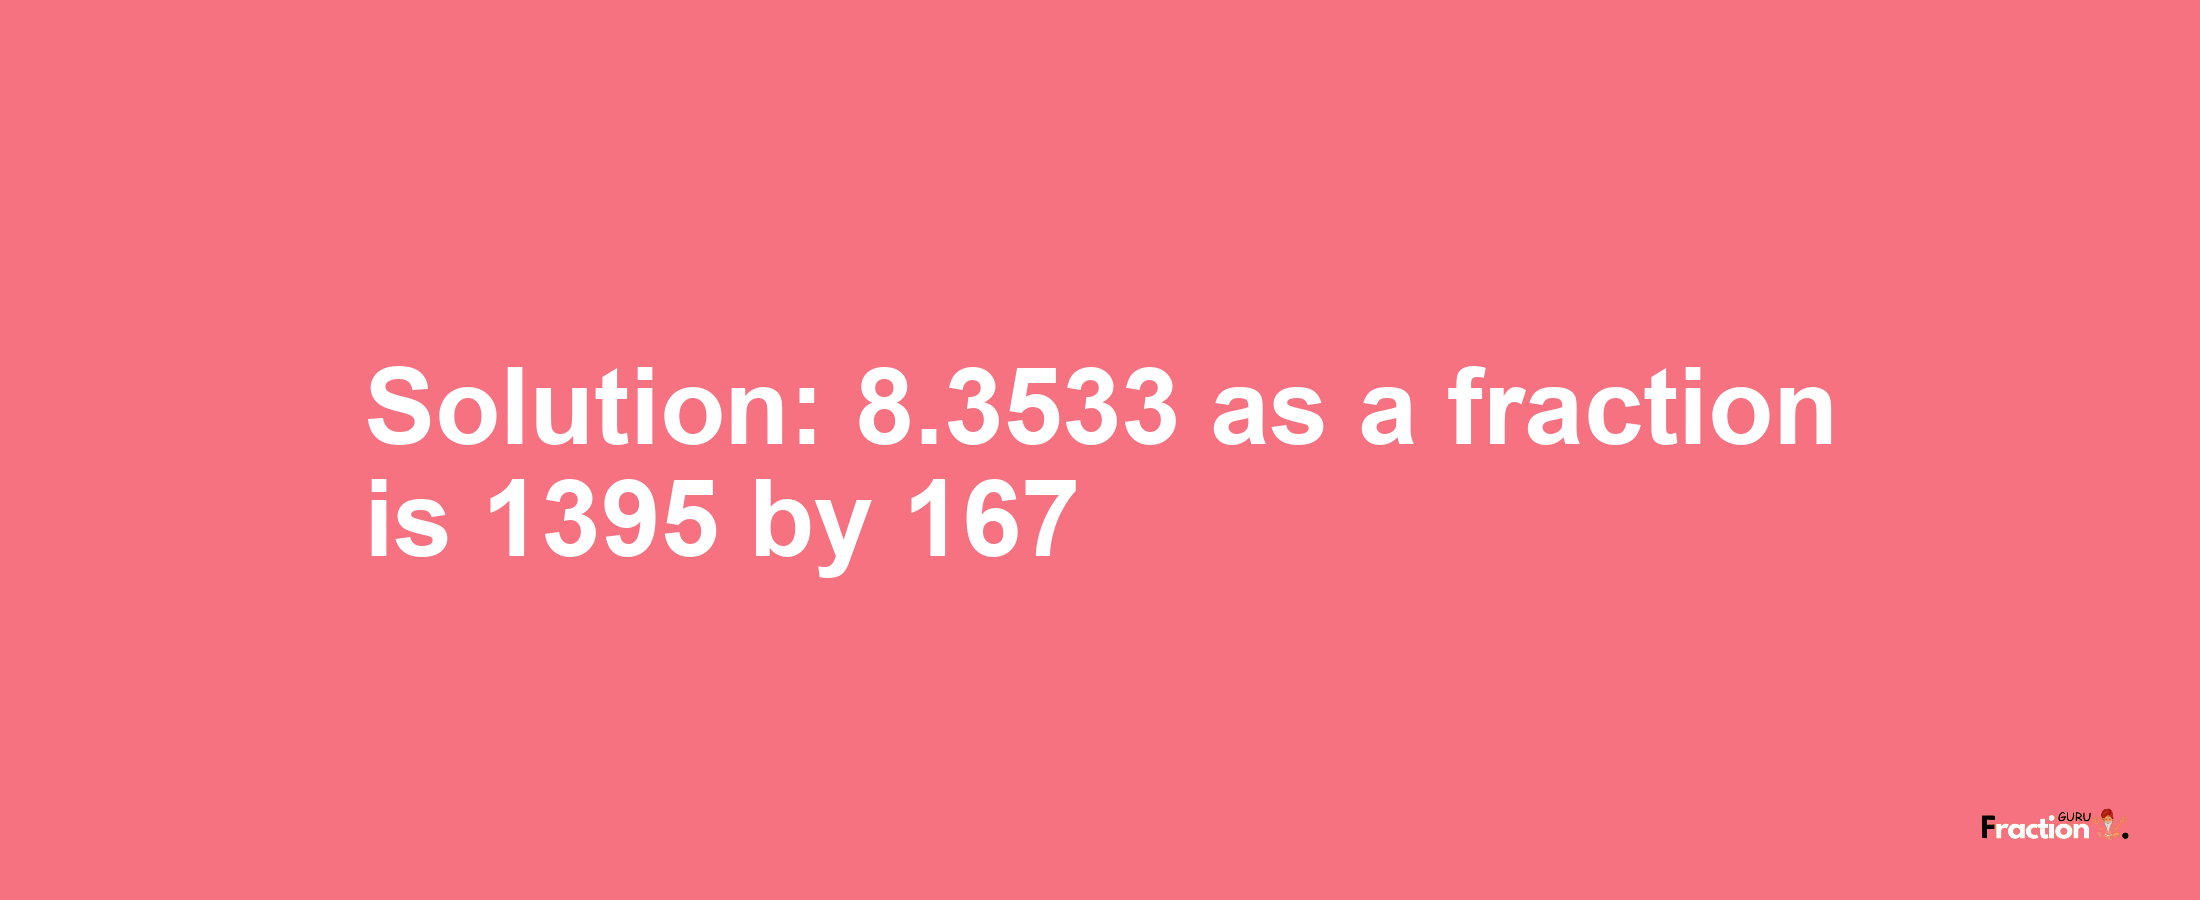 Solution:8.3533 as a fraction is 1395/167